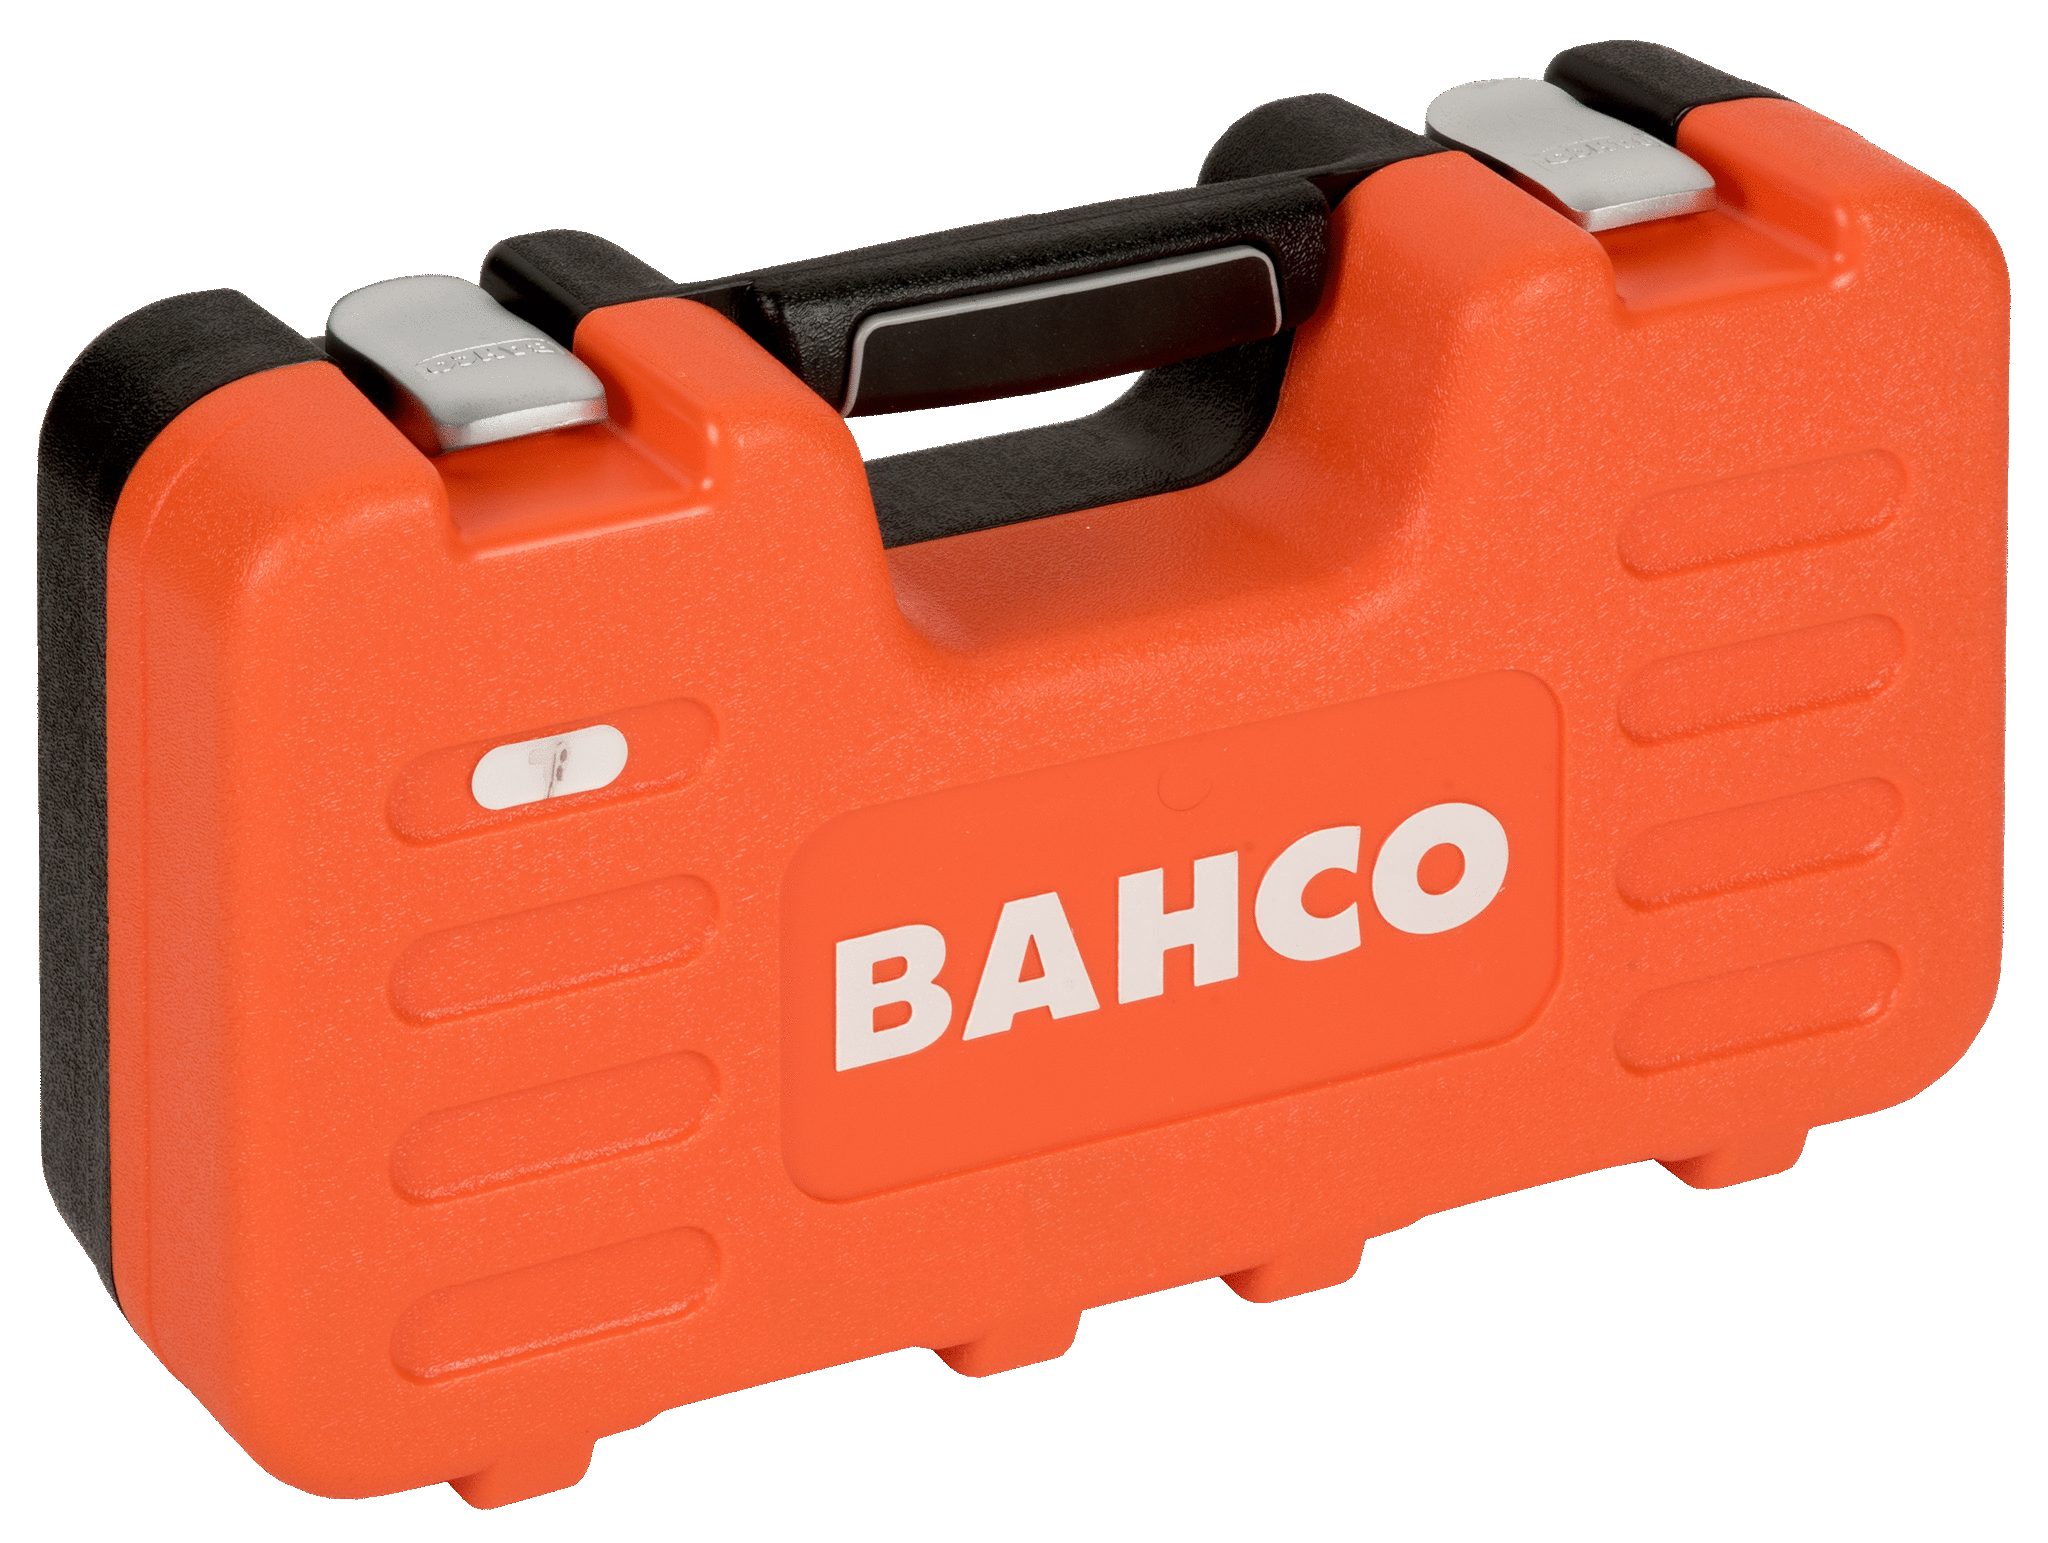 1/4" Square Drive Socket Set with Metric Hex Profile and Socket Drivers - S460 by Bahco